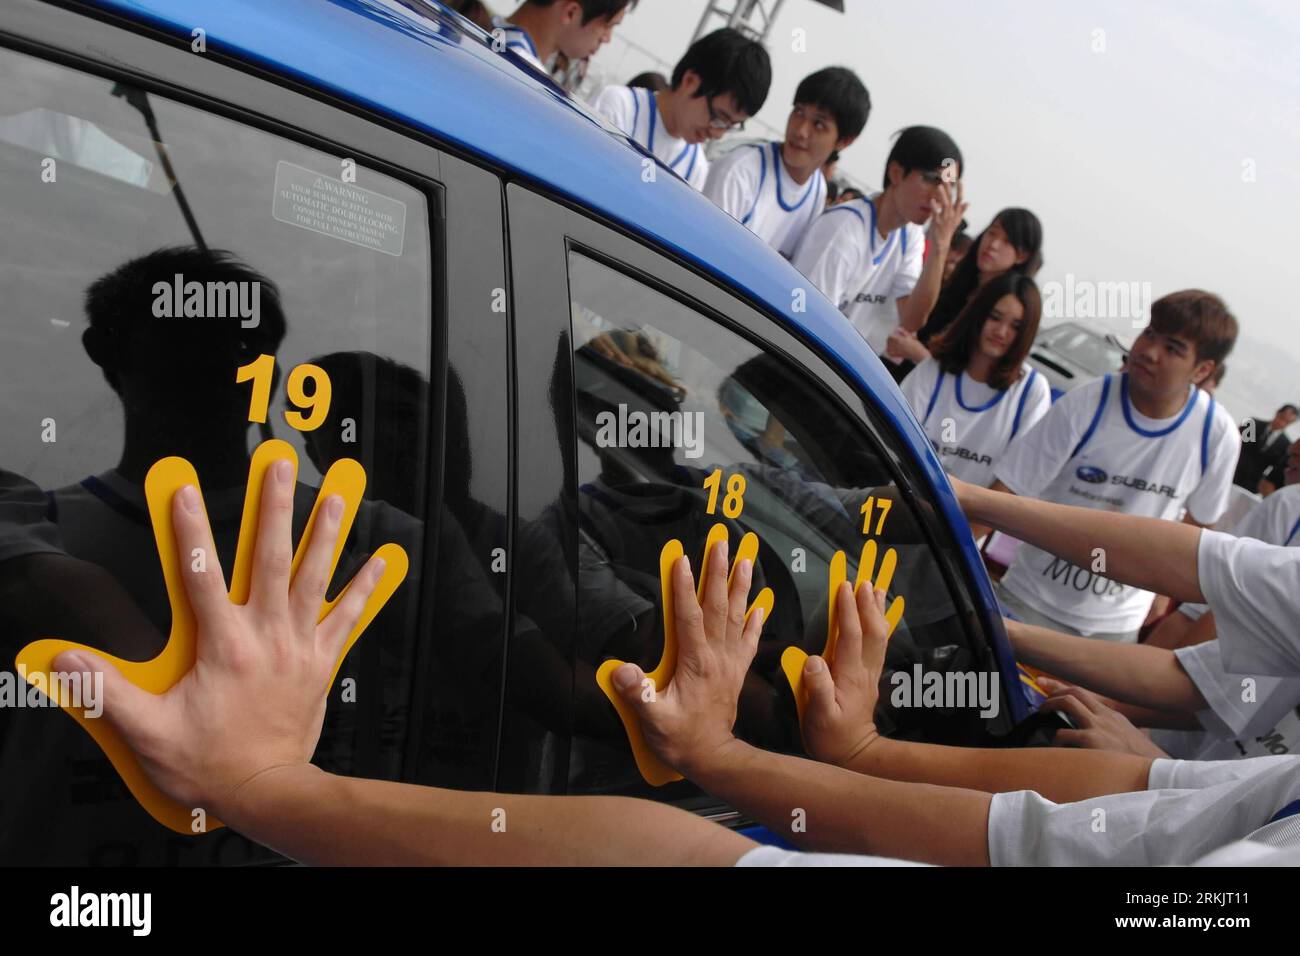 Bildnummer: 56161333  Datum: 09.10.2011  Copyright: imago/Xinhua (111009) -- MACAO, Oct. 9, 2011 (Xinhua) -- Competitors participate in the Subaru Palm Challenge 2011 in Macao, south China, Oct. 9, 2011. Contestants are asked to follow some instructions while sticking their right hands to a car for six hours. (Xinhua/Cheong Kam Ka)(cyl) CHINA-MACAO-SUBARU PALM CHALLENGE 2011 (CN) PUBLICATIONxNOTxINxCHN Gesellschaft Wettkampf kurios Auto berühren x0x xtm 2011 quer      56161333 Date 09 10 2011 Copyright Imago XINHUA  Macao OCT 9 2011 XINHUA Competitors participate in The Subaru Palm Challenge 2 Stock Photo